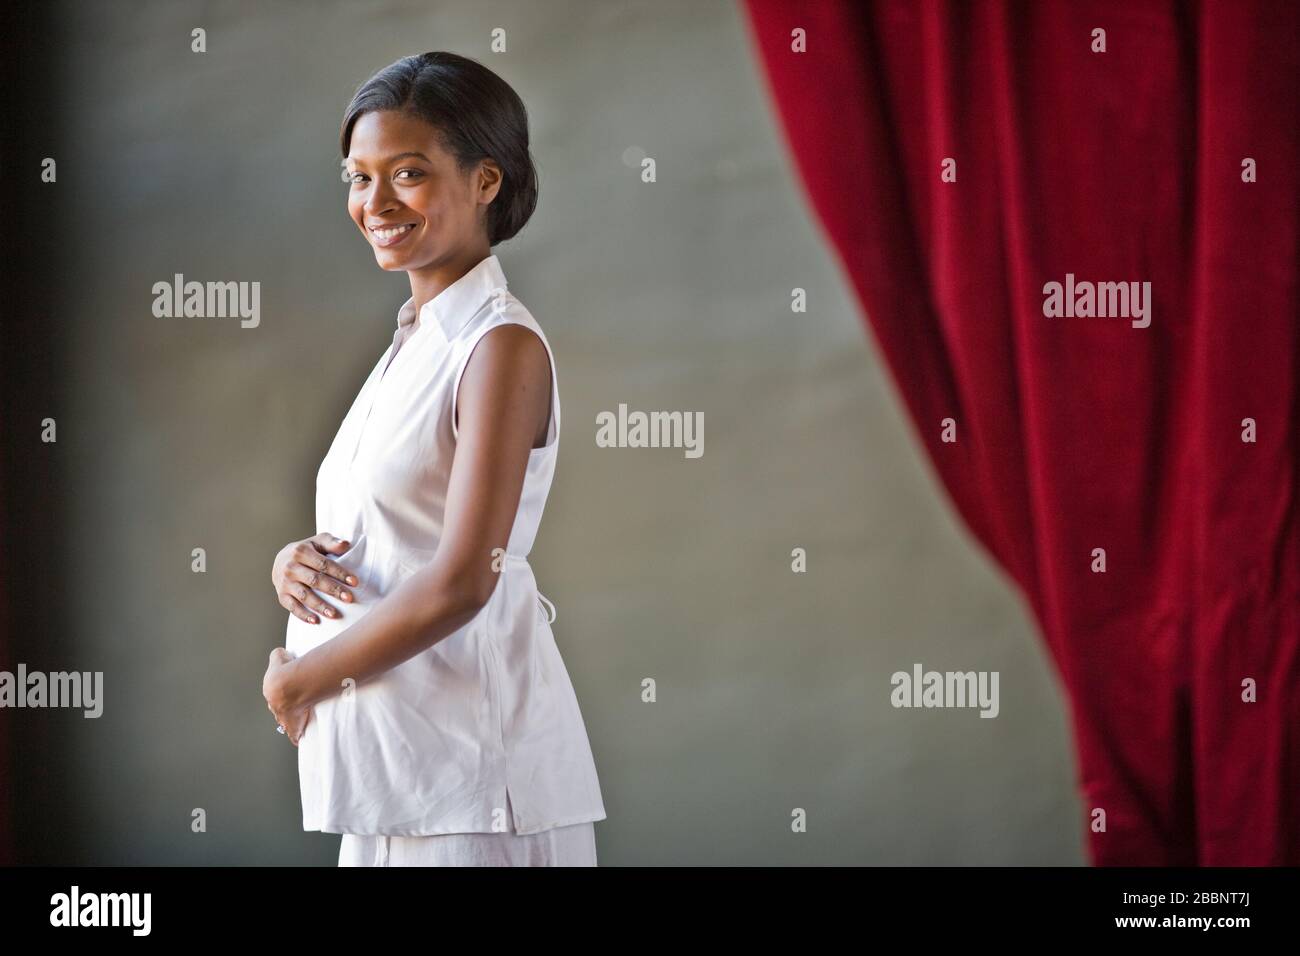 Portrait of a smiling pregnant mid-adult woman standing with her hand on her belly. Stock Photo